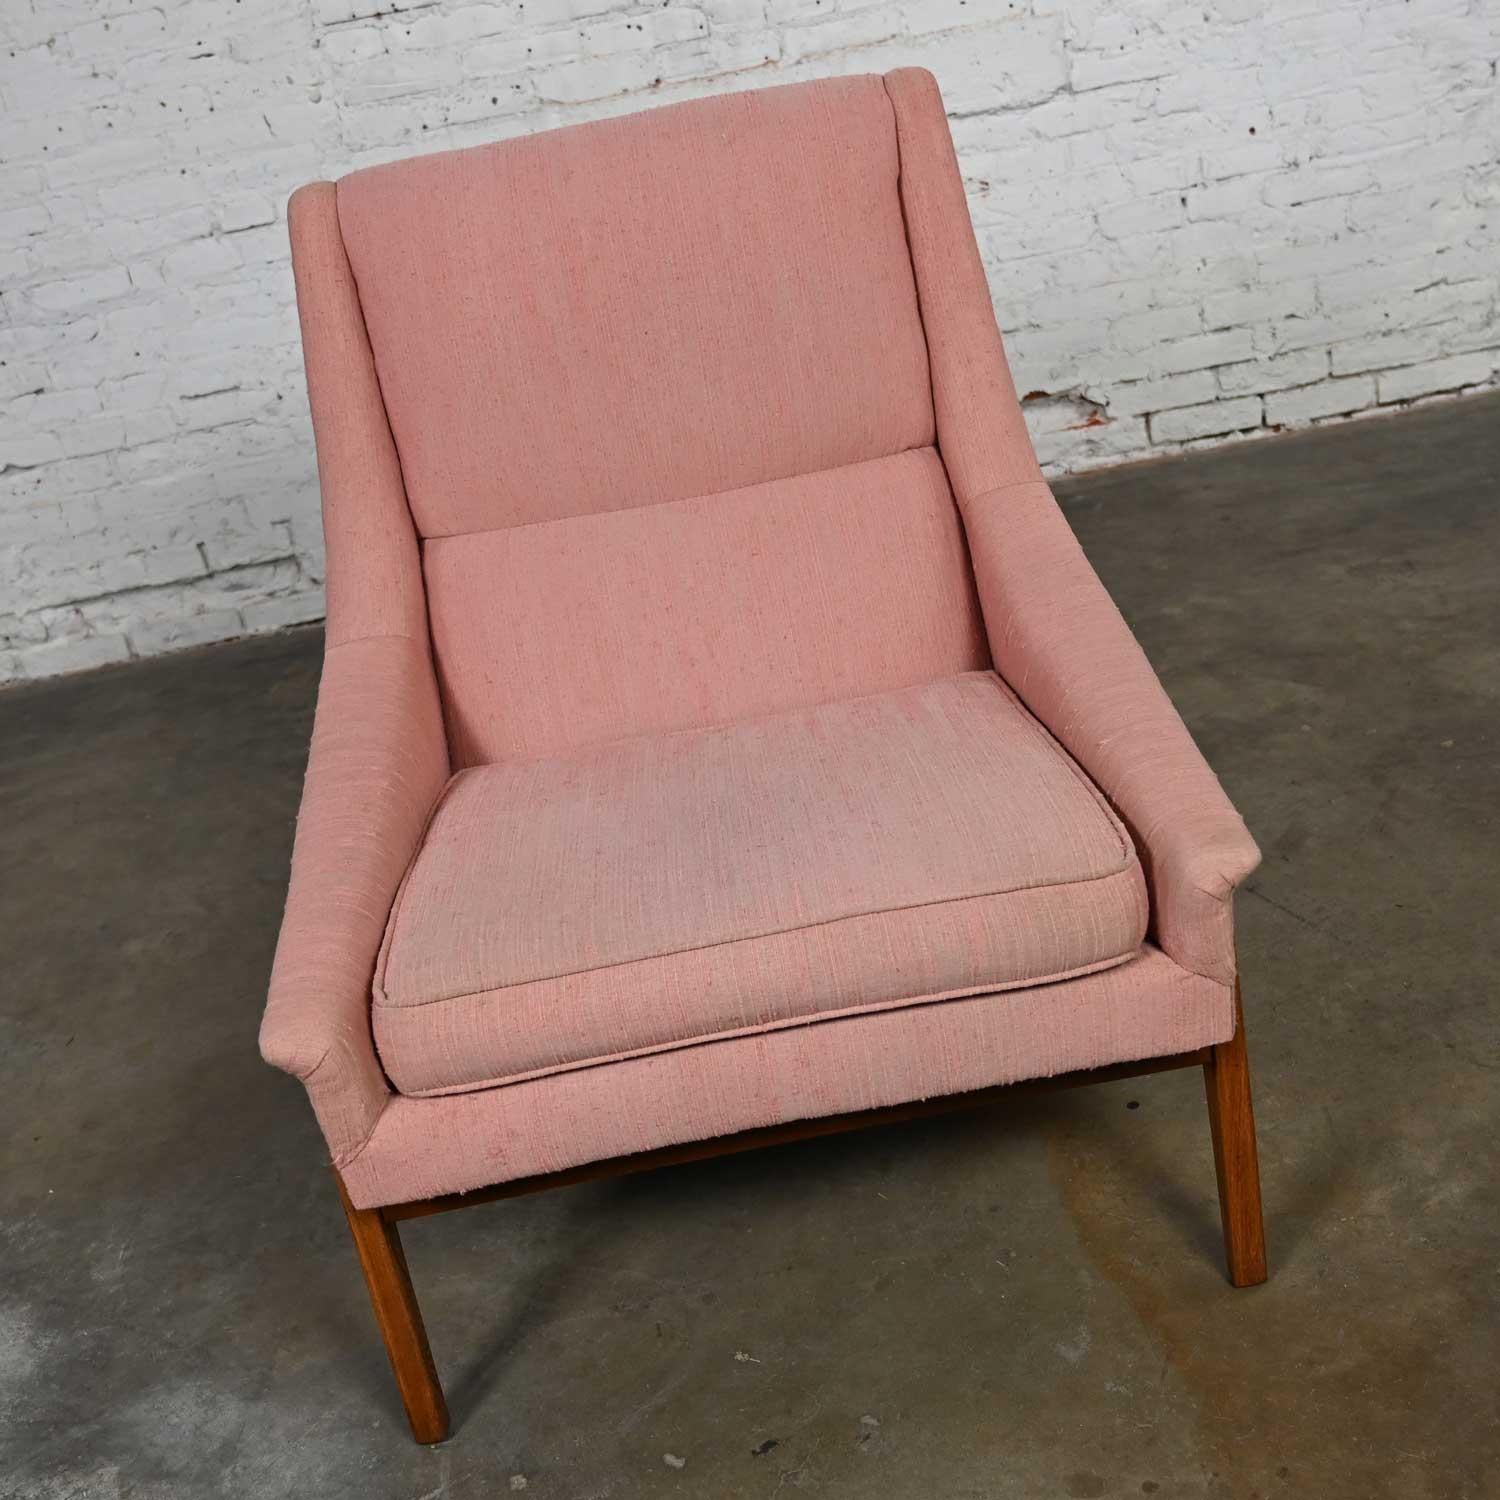 Lovely vintage Mid-Century Modern lounge chair with walnut & ash frame and original pink fabric in the style of Dux or Kroehler and almost certainly American made. Beautiful condition, keeping in mind that this is vintage and not new so will have